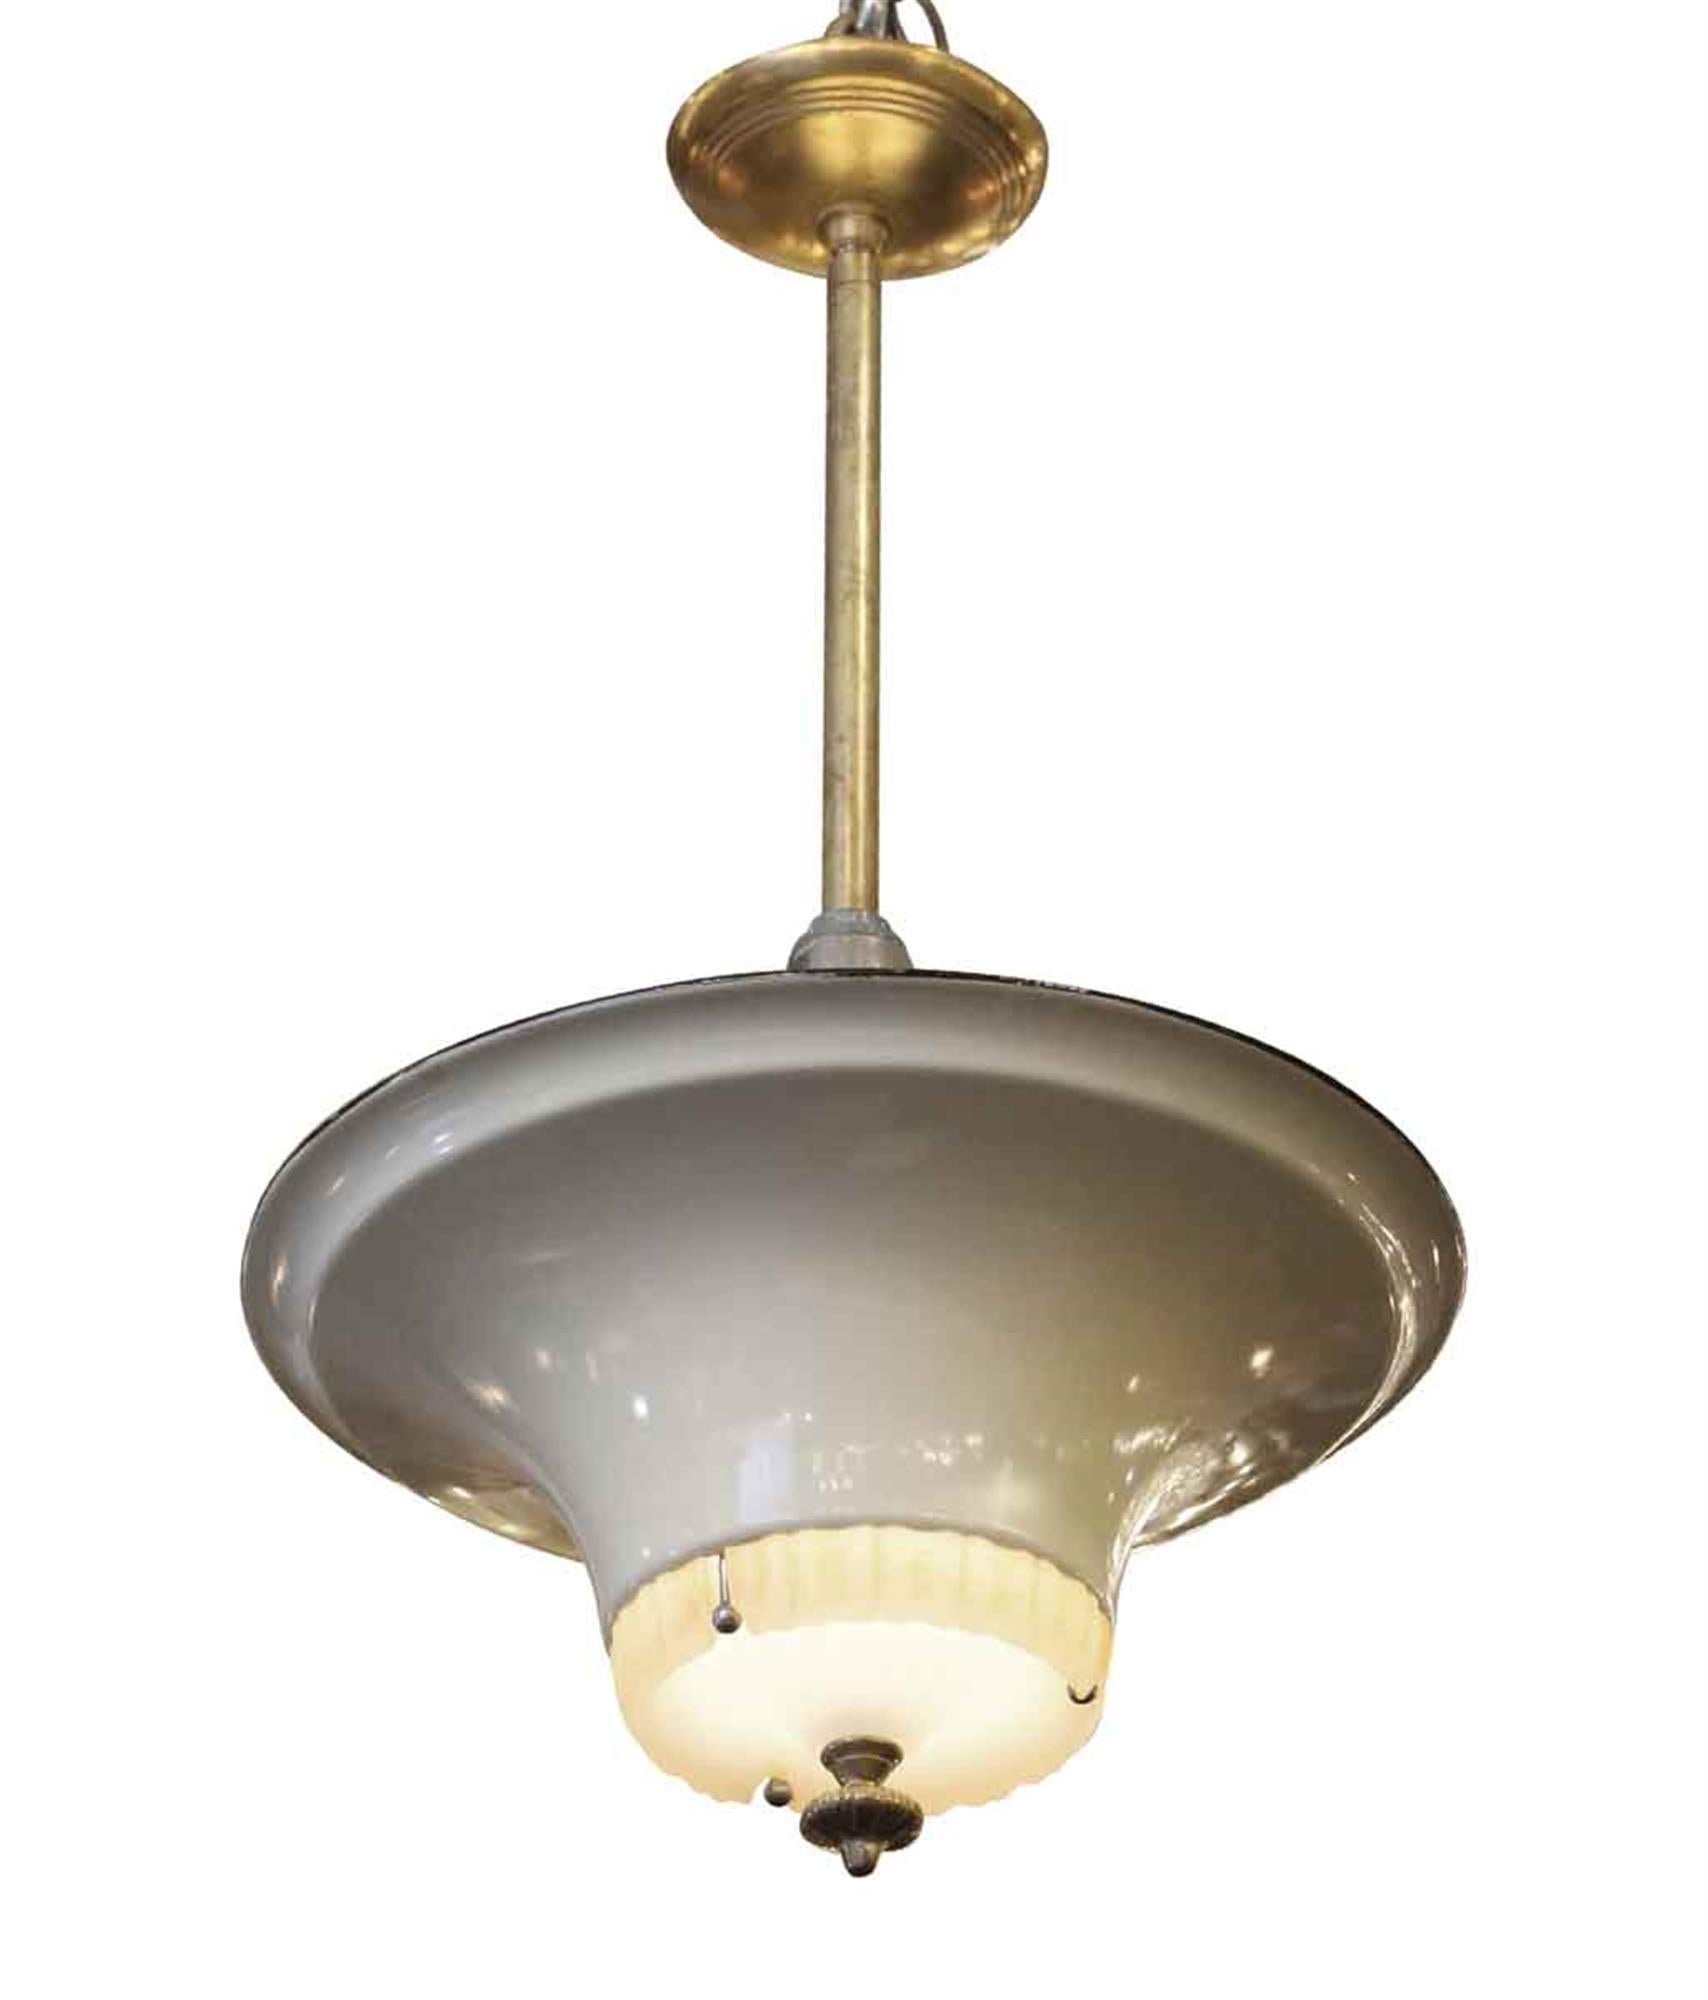 All original Jetson style 1940s gray enameled metal saucer light with a milk glass center and a brass finial, pole and canopy. This can be seen at our 302 Bowery location in Manhattan.